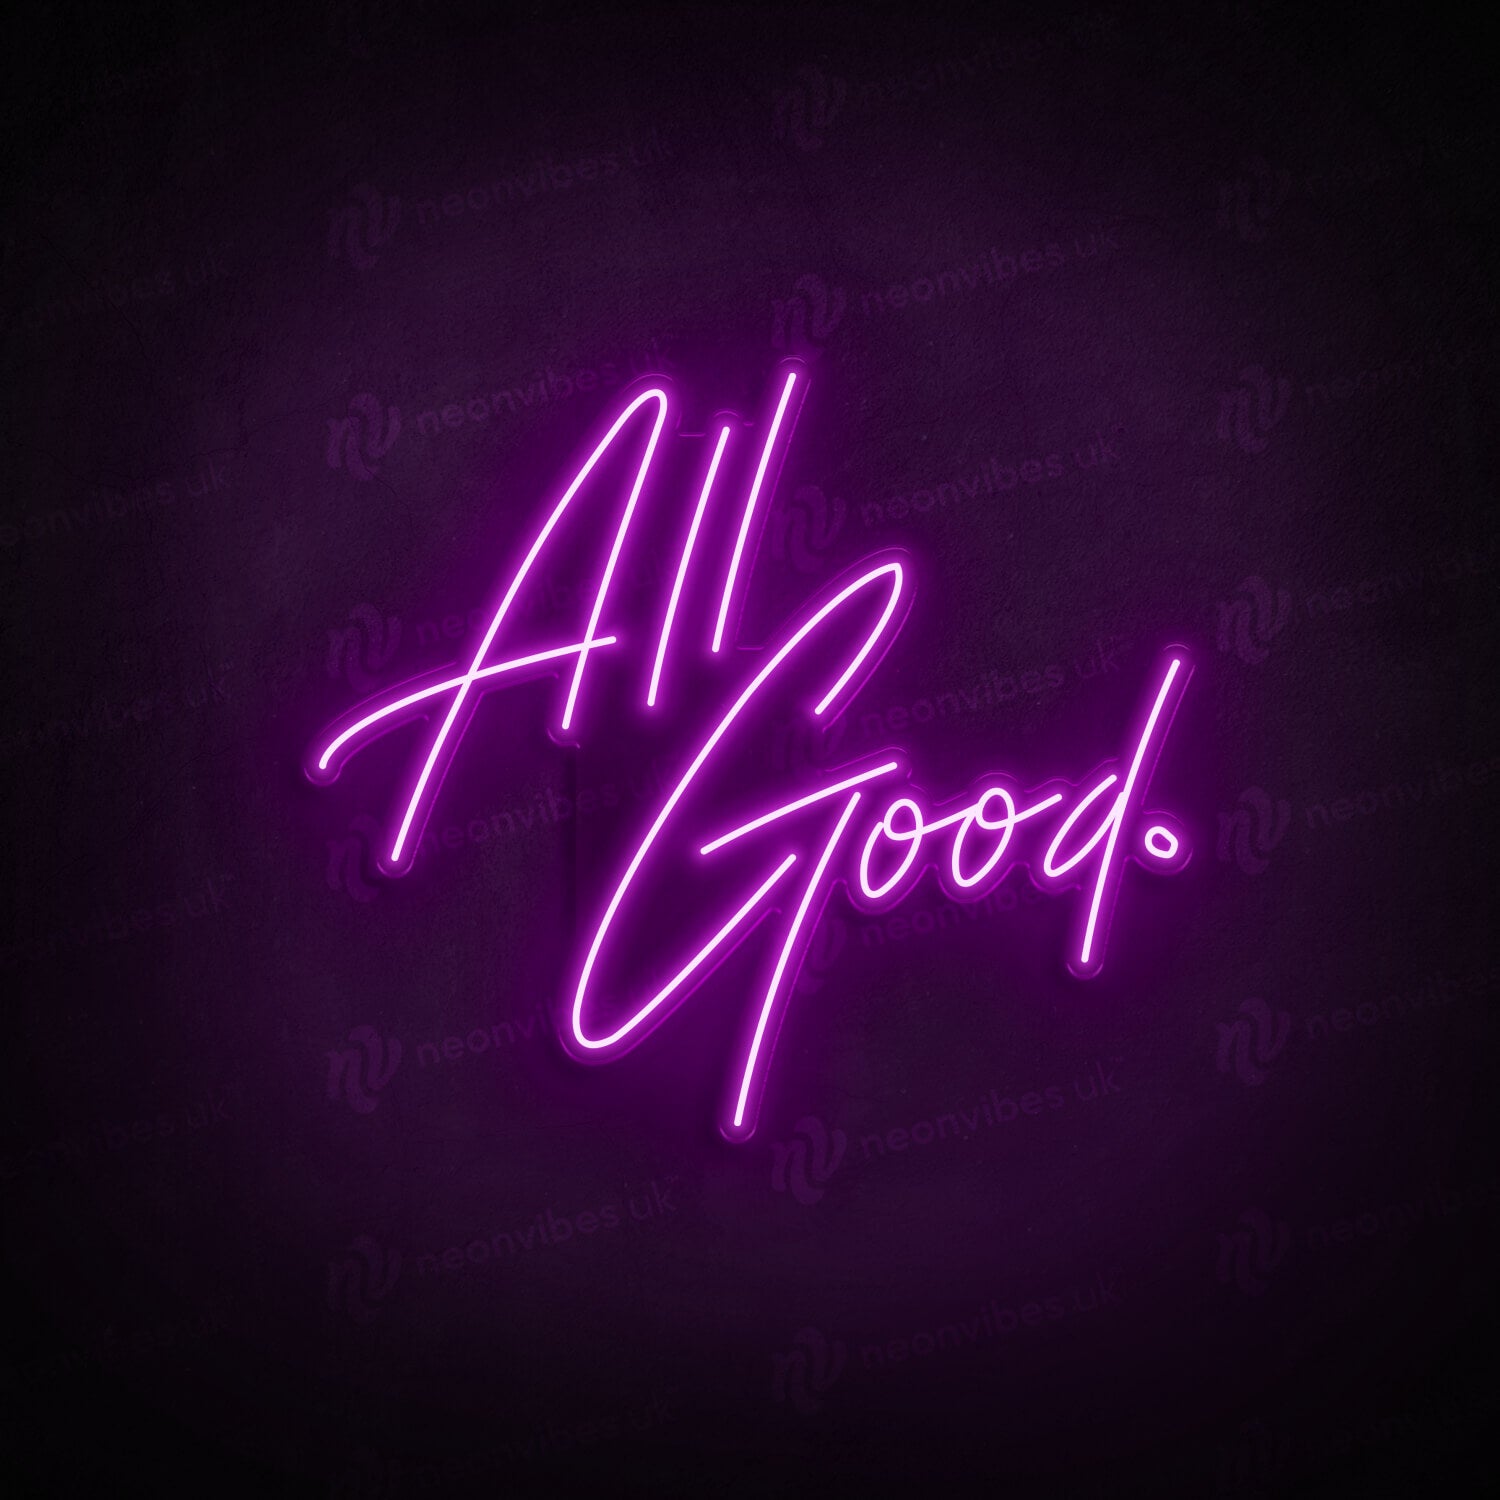 All good neon sign